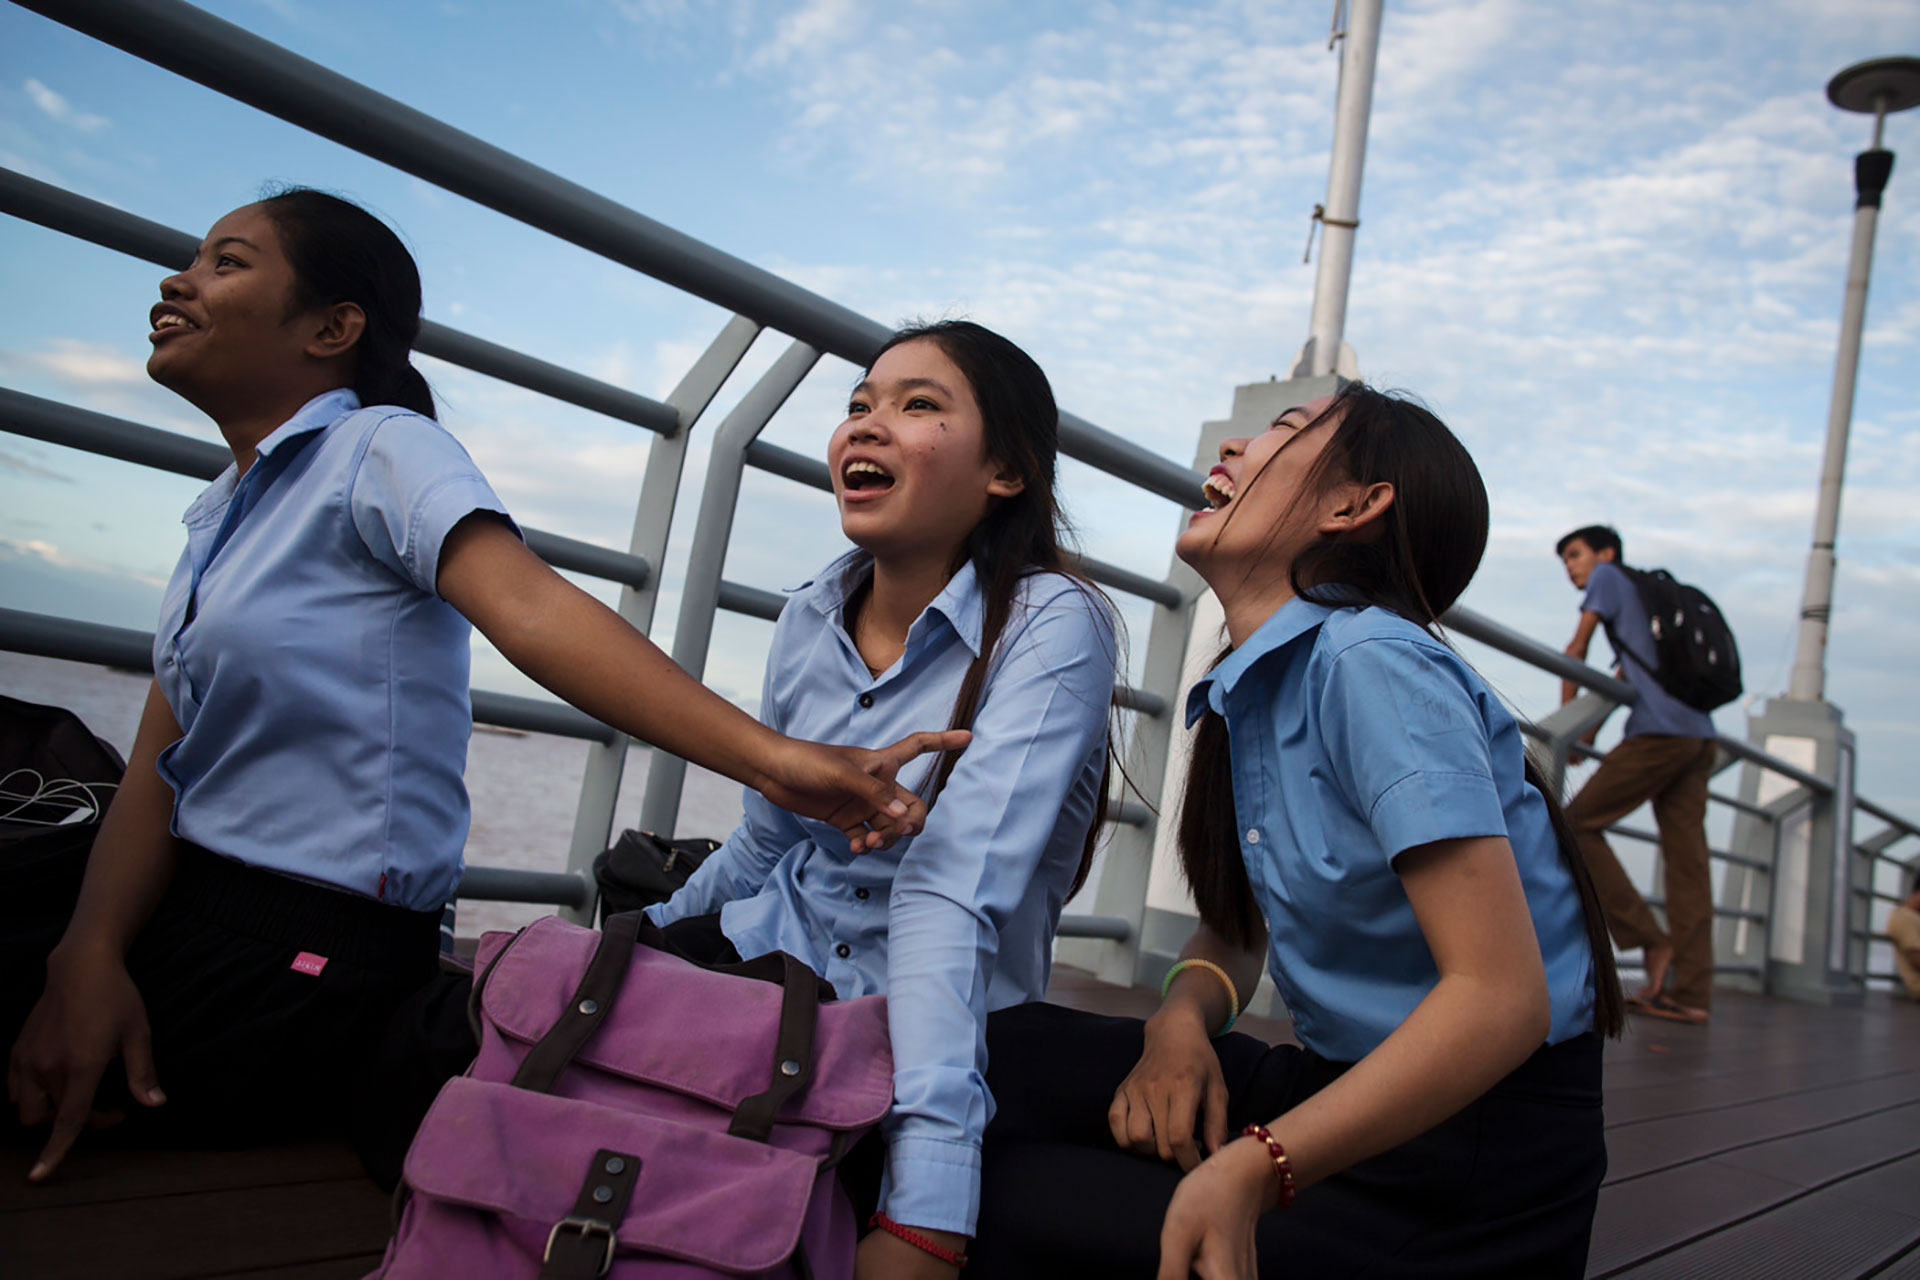 Midwife students hangout on the boardwalk, in Phnom Penh, Cambodia, July 27, 2017. All of these students, who are in their first year of midwifery school didn't know that abortion was legal except in special cases. None of them had boyfriends at the moment, but some had in the past. One had broken up with a boy because he cheated on her, and another because she 'needed to be free'. Cambodia has a very traditional culture, which makes it hard for young women to meet friends or boys outside the home, particularly in rural areas. But in the cities, urban teenage life is radically different from that of their country counterparts. Although still very conservative, and city girls are subject to strict curfews, they also can spend their free time with friends prowling through malls and sitting on boardwalks, eating out, or skateboarding. 